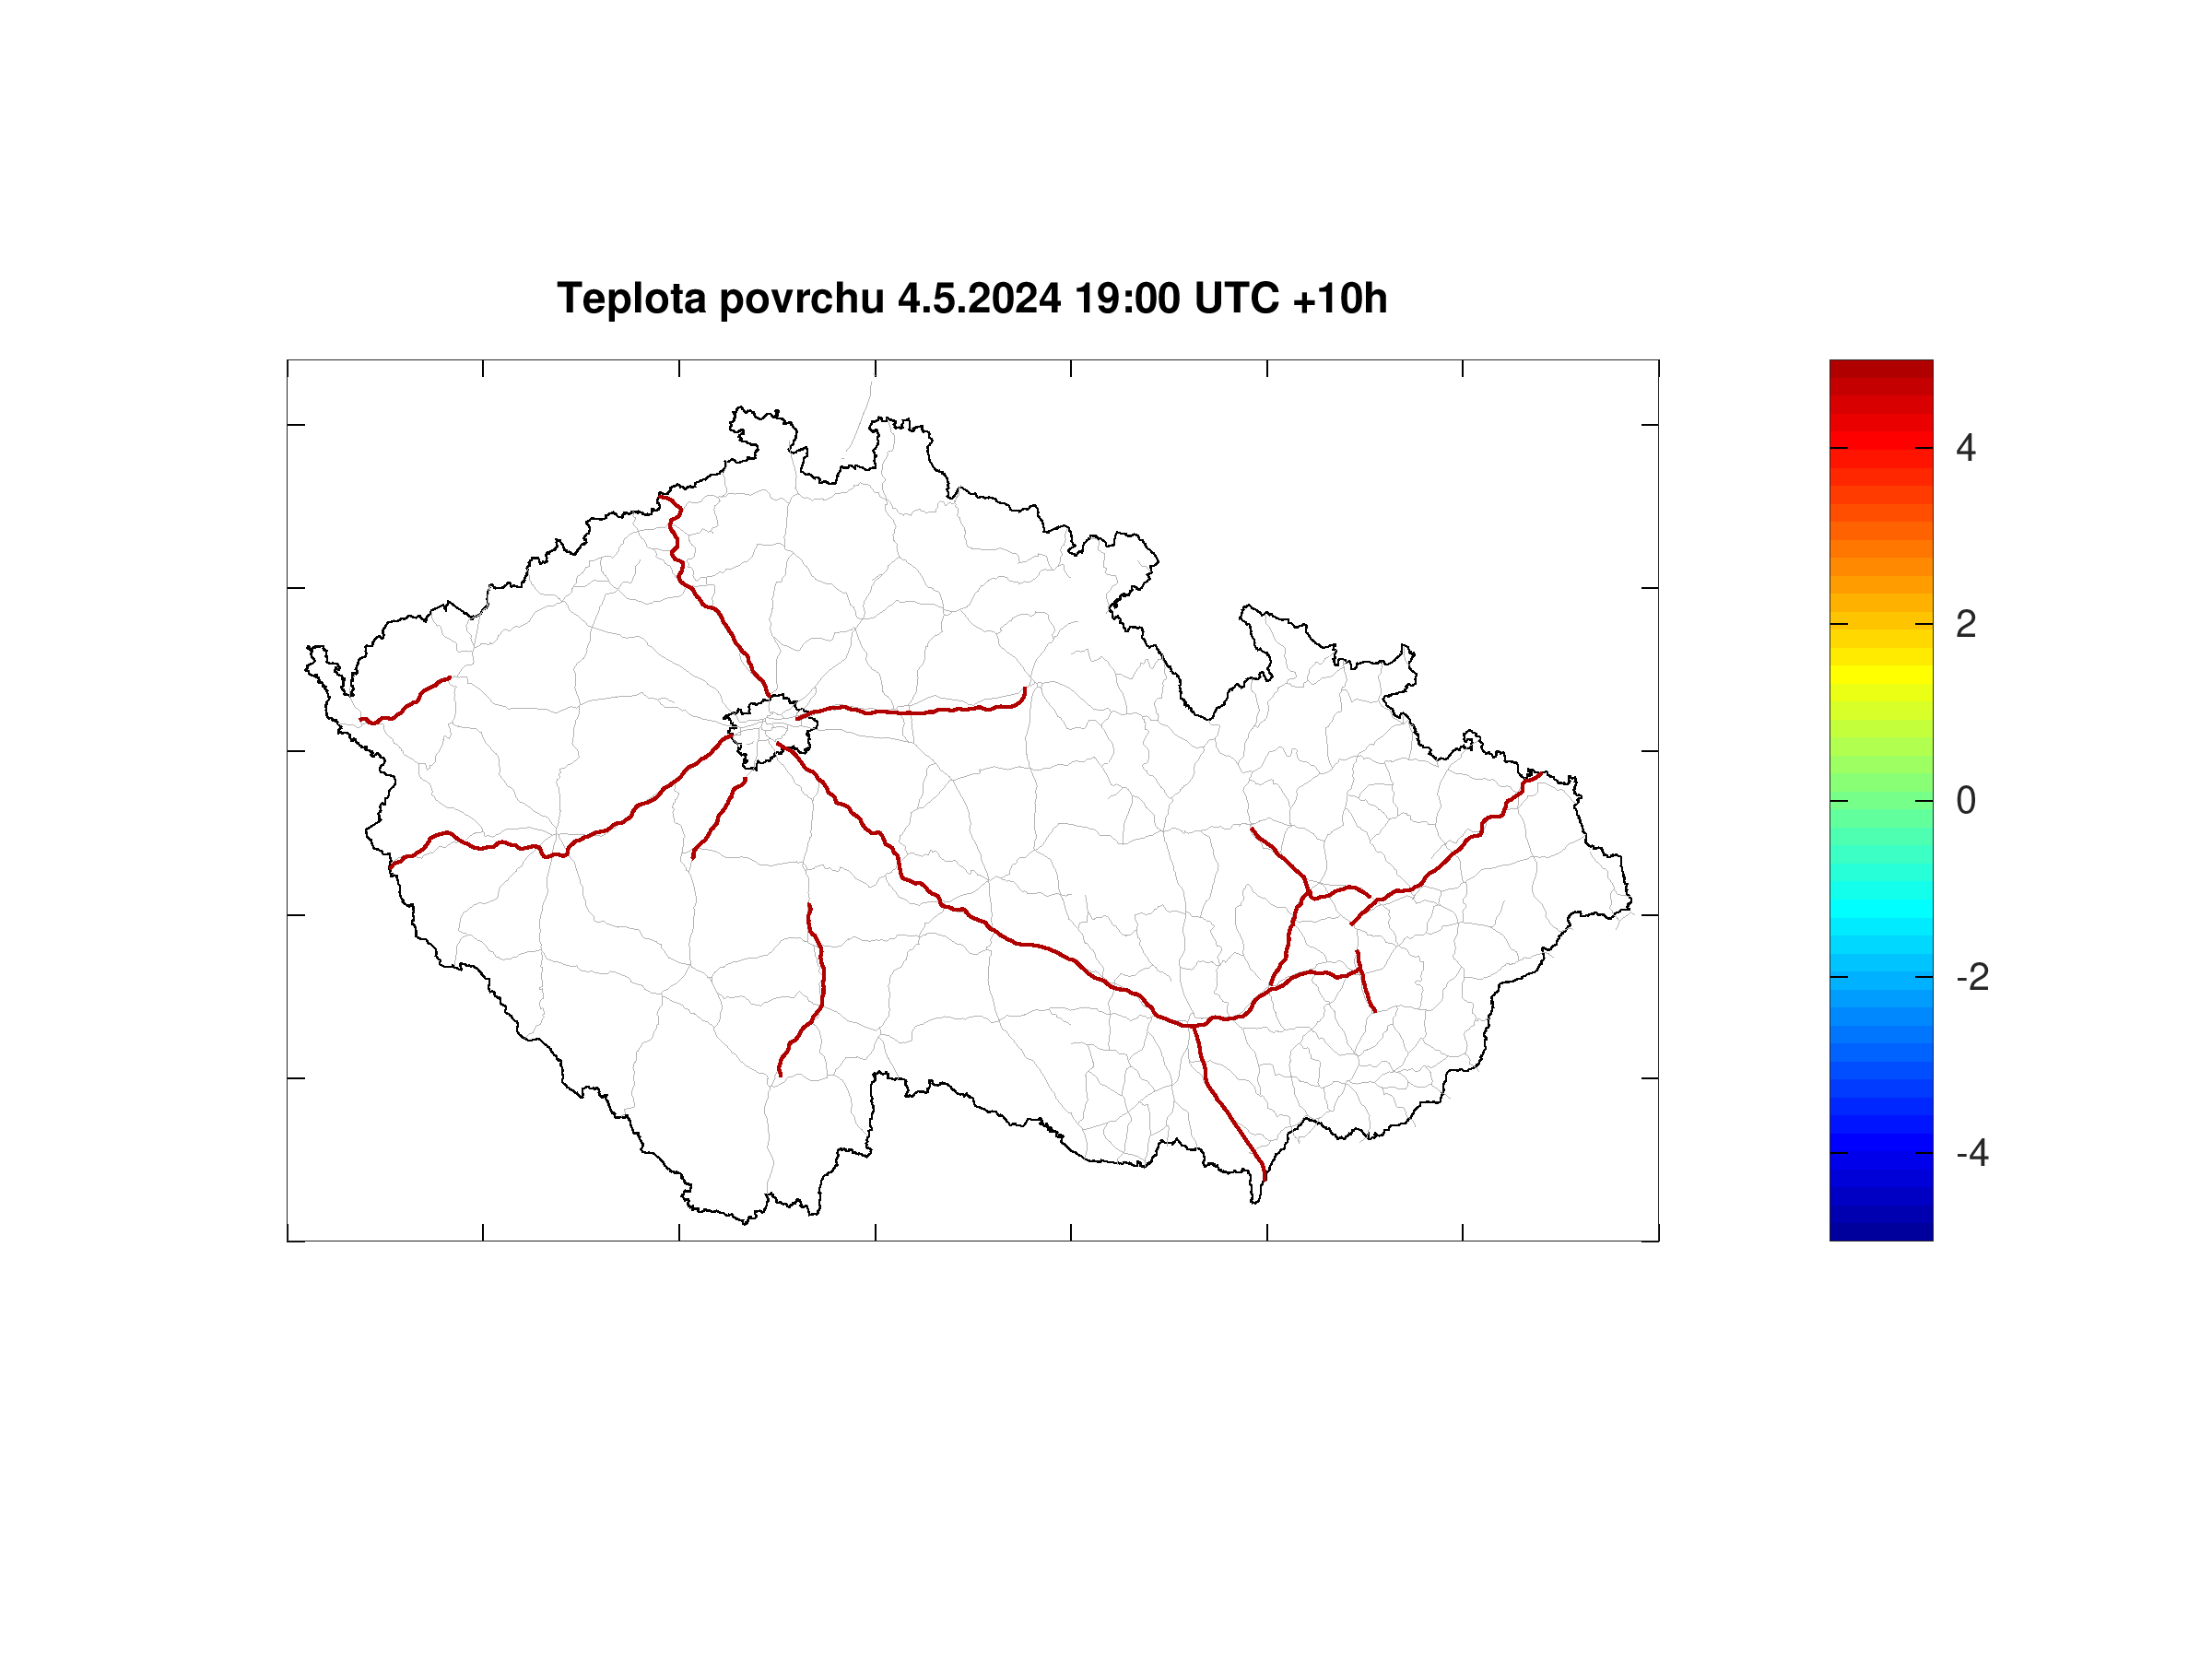 Road surface teperature forecast for Czech highways +10h